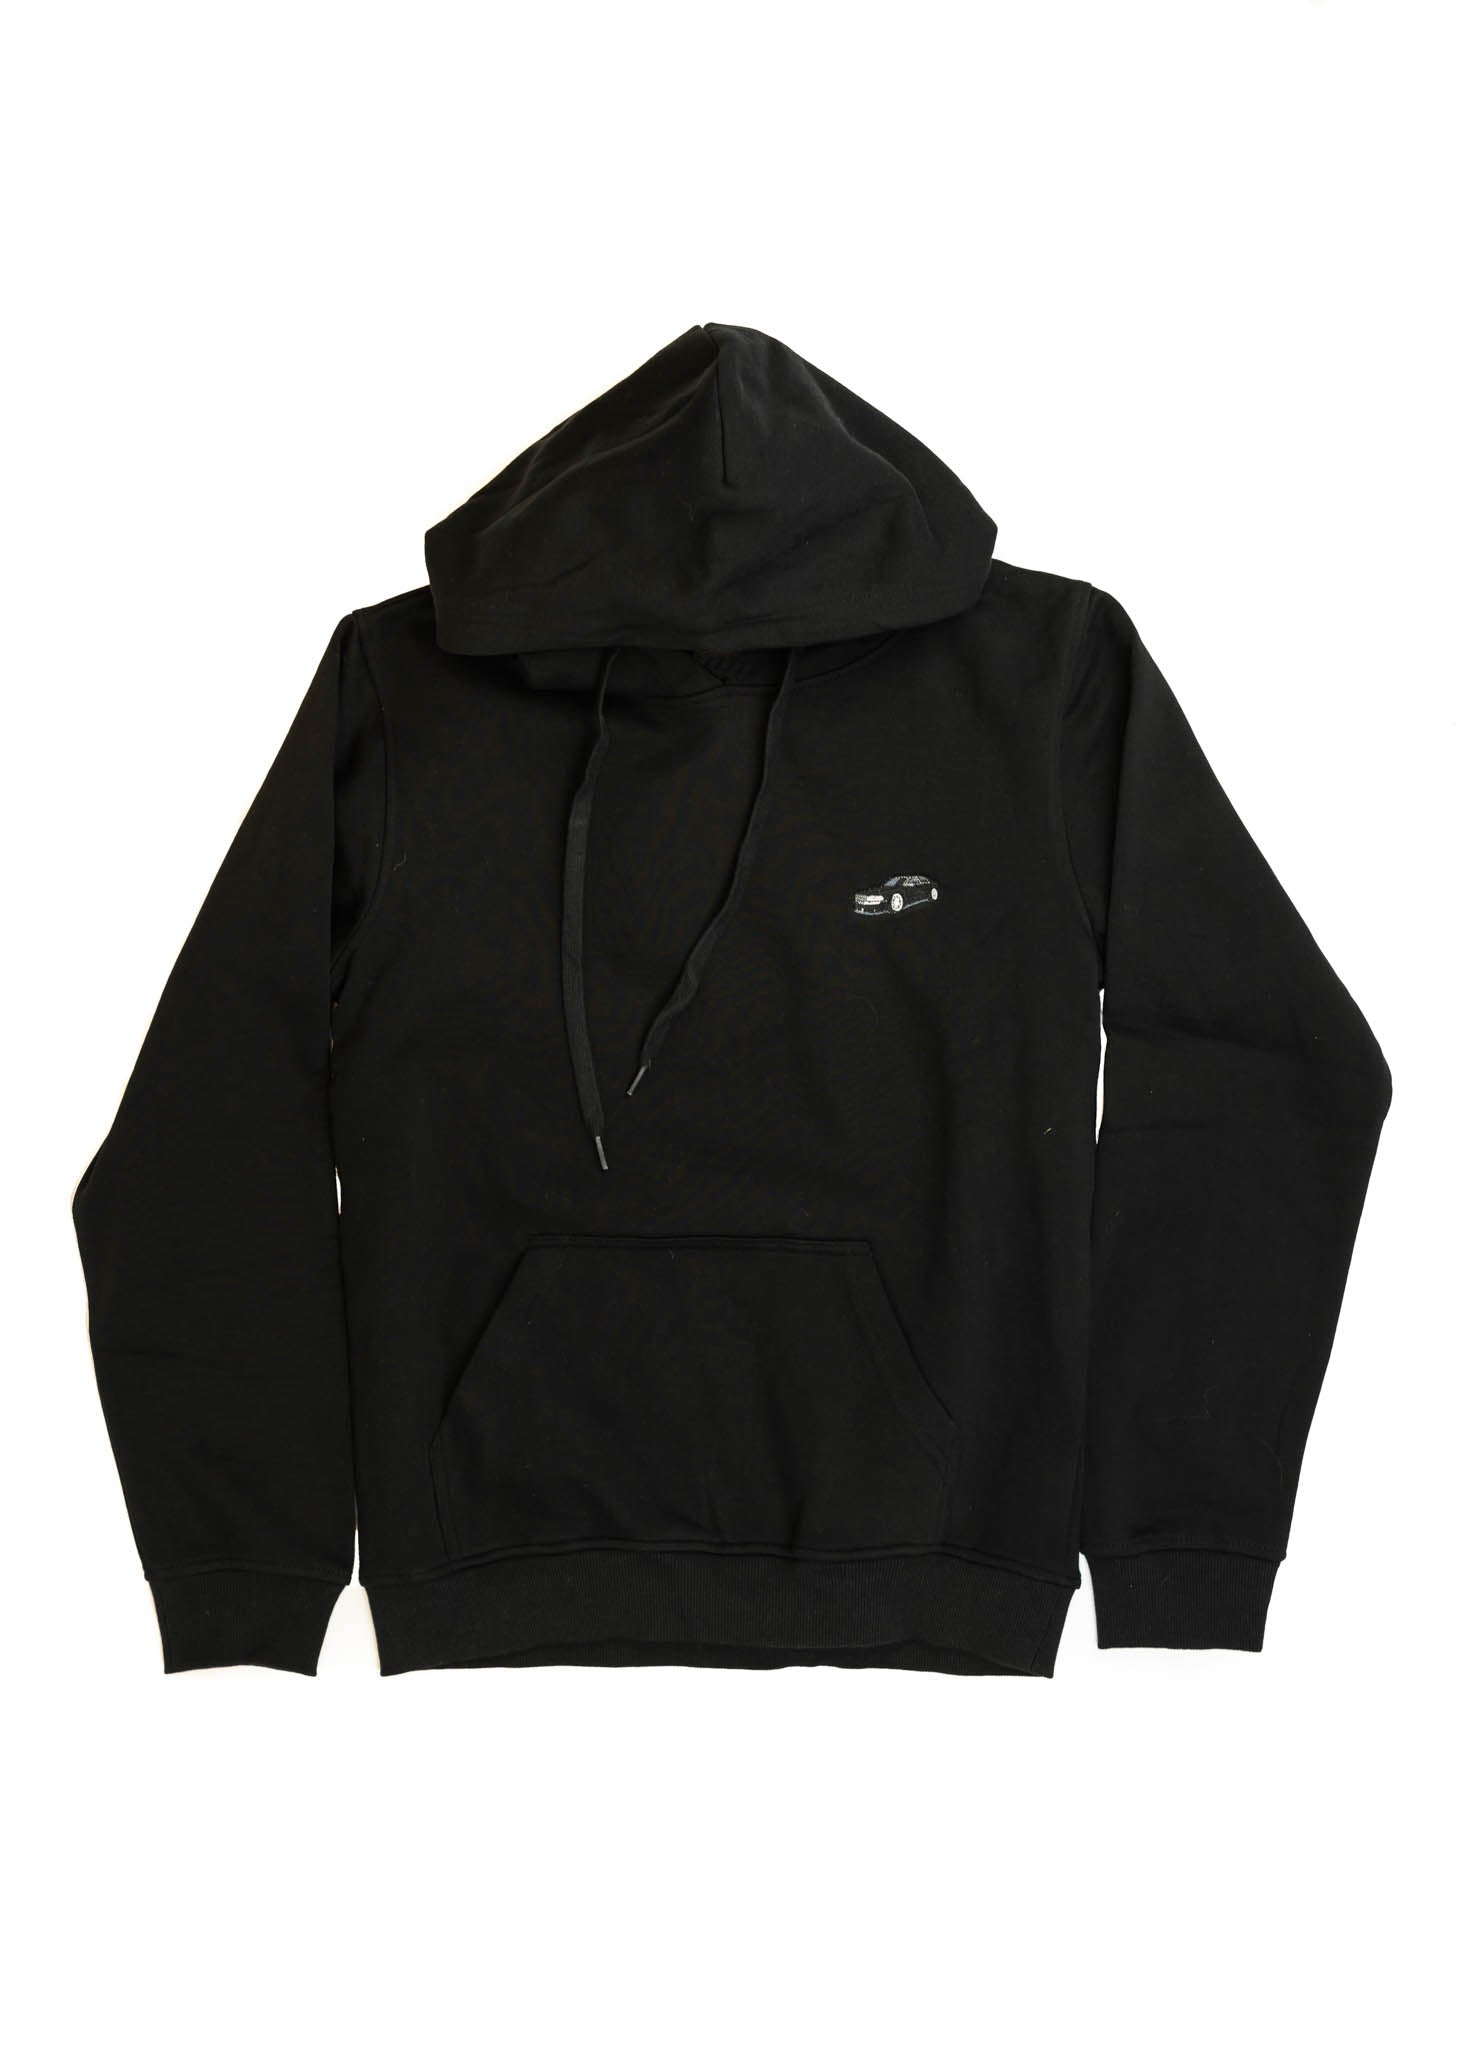 A black Audi hoodie for men and women. Photo is a front view of the sweater with an embroidered Black Audi D2 S8. Fabric composition is cotton, polyester, and rayon. The material is very soft, stretchy, anti-shrink, and non-transparent. The style of this hoodie is long sleeve, crewneck with a hood, hooded, with embroidery on the left chest.